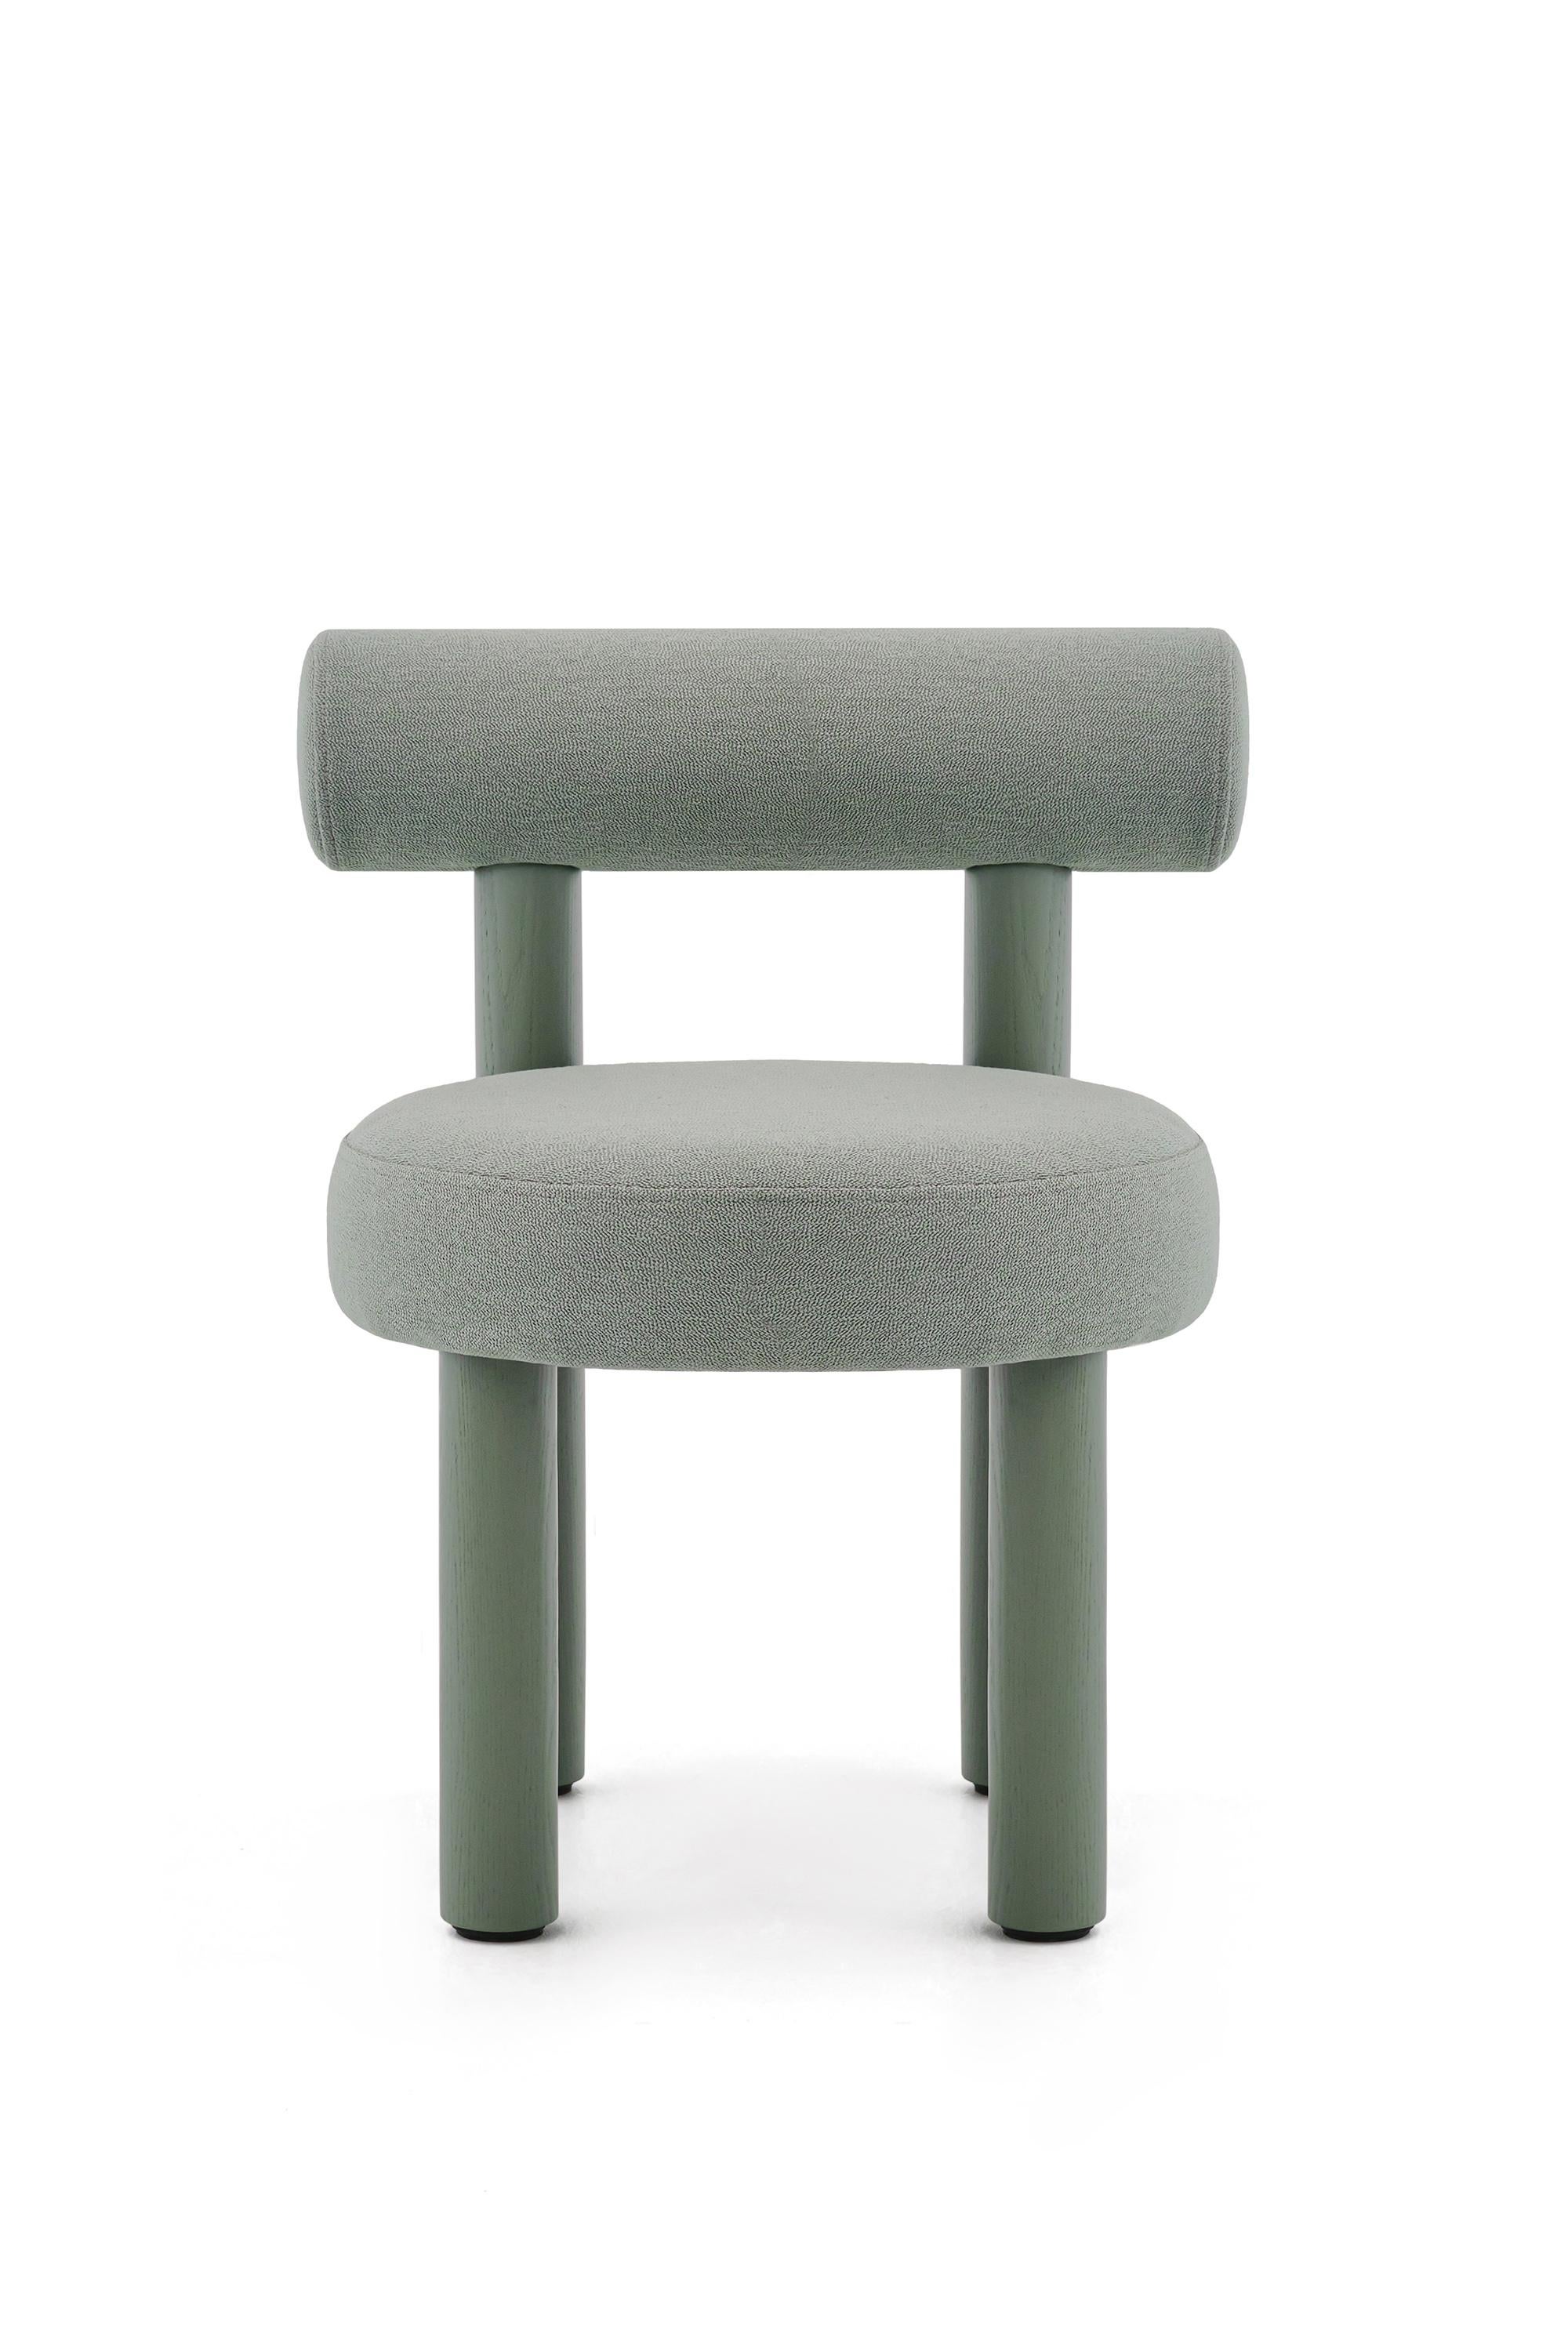 Ukrainian Modern Dining Chair Gropius CS2 with Wooden Legs Painted in RAL color by Noom